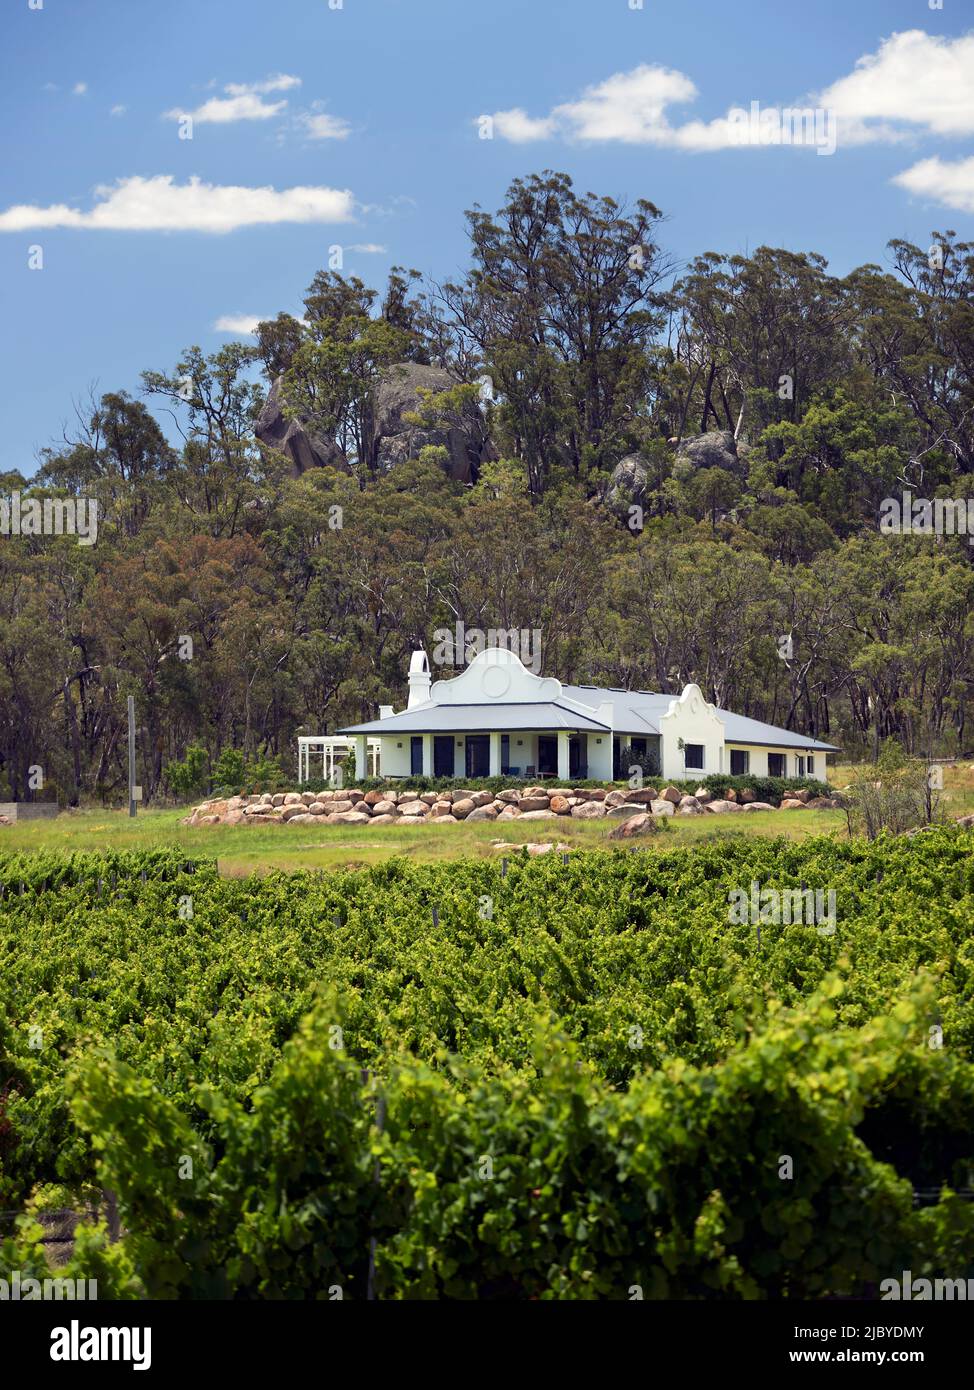 View across vineyard looking towards homestead and native trees behind Stock Photo